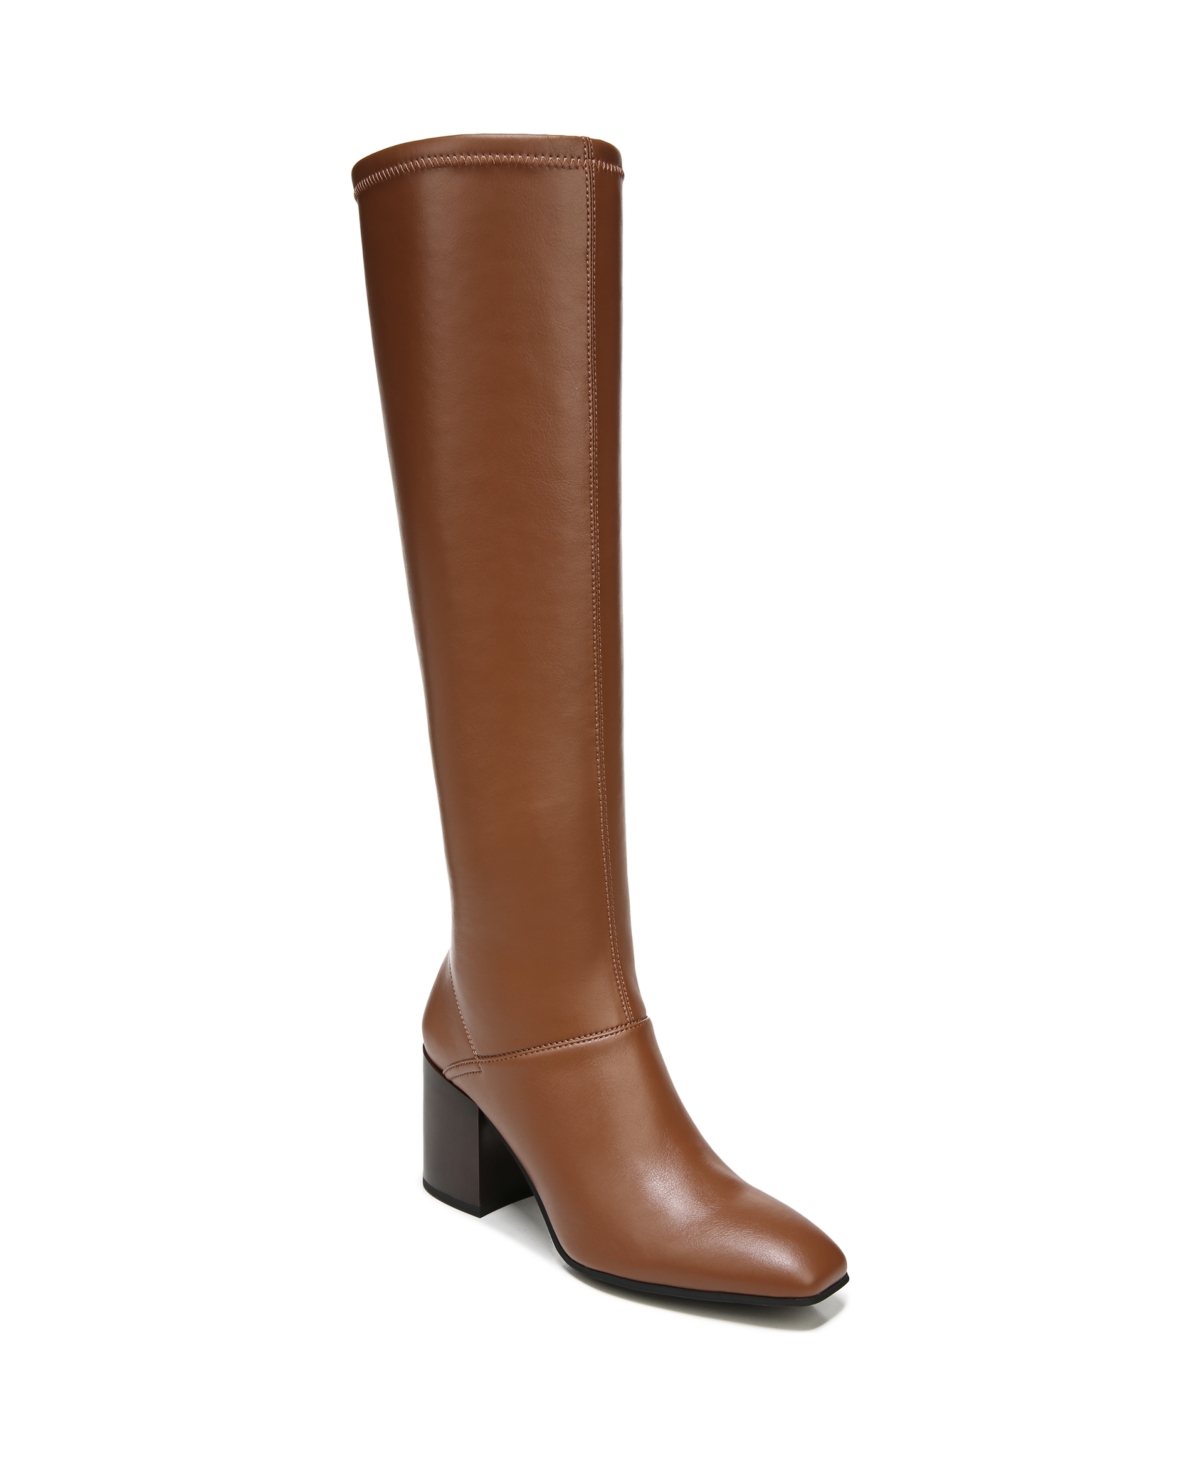 UPC 017138593045 product image for Franco Sarto Tribute High Shaft Boots Women's Shoes | upcitemdb.com